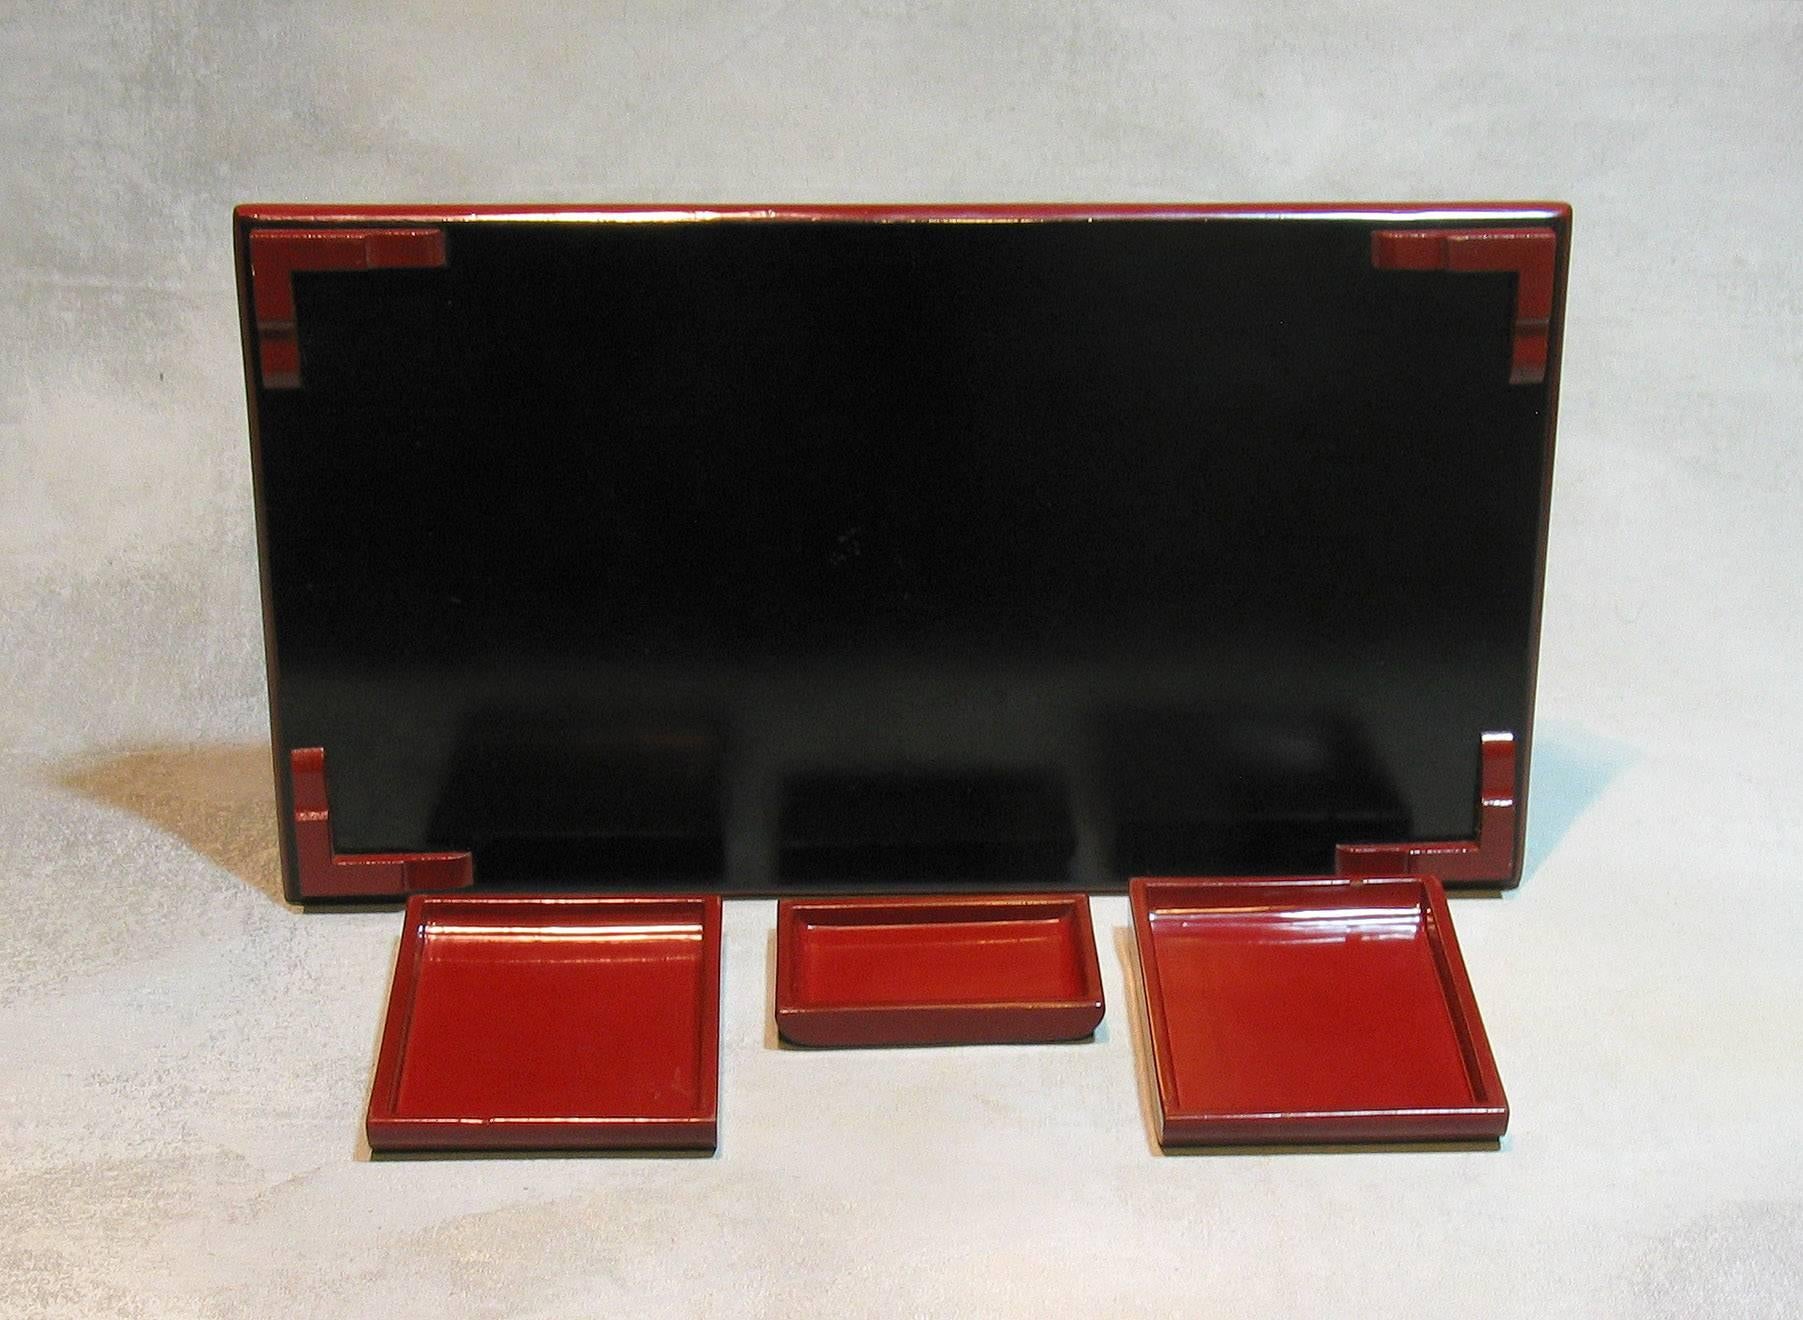 Rare Antique Chinese Red Lacquer Desk Box Early 20th Century In Good Condition For Sale In Ottawa, Ontario